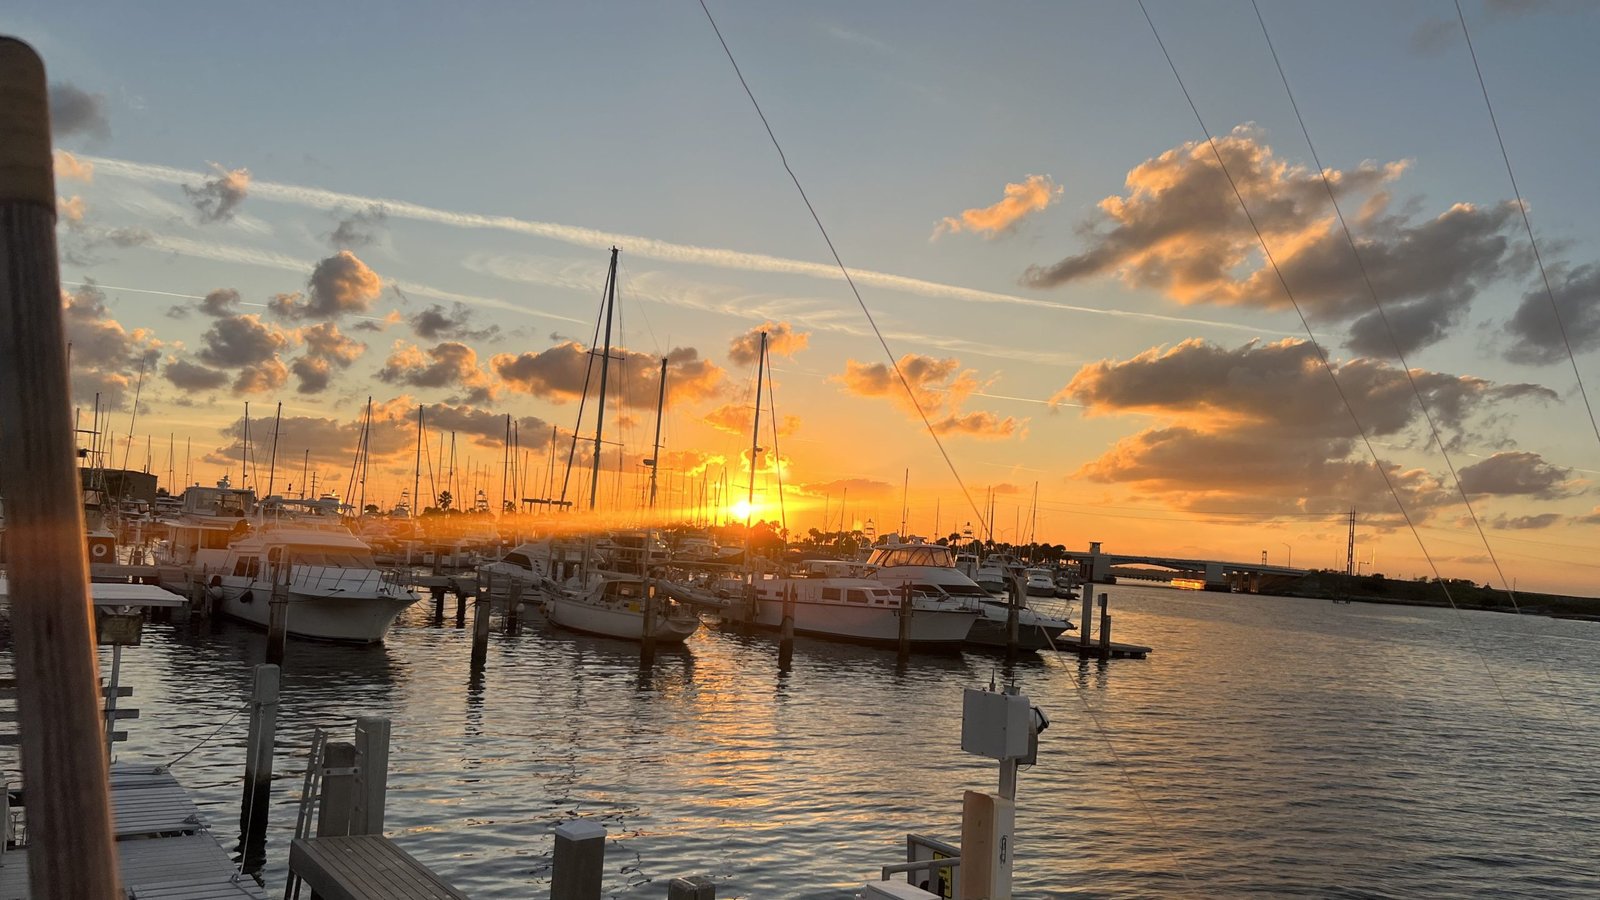 Sunset over the marina at Port Canaveral